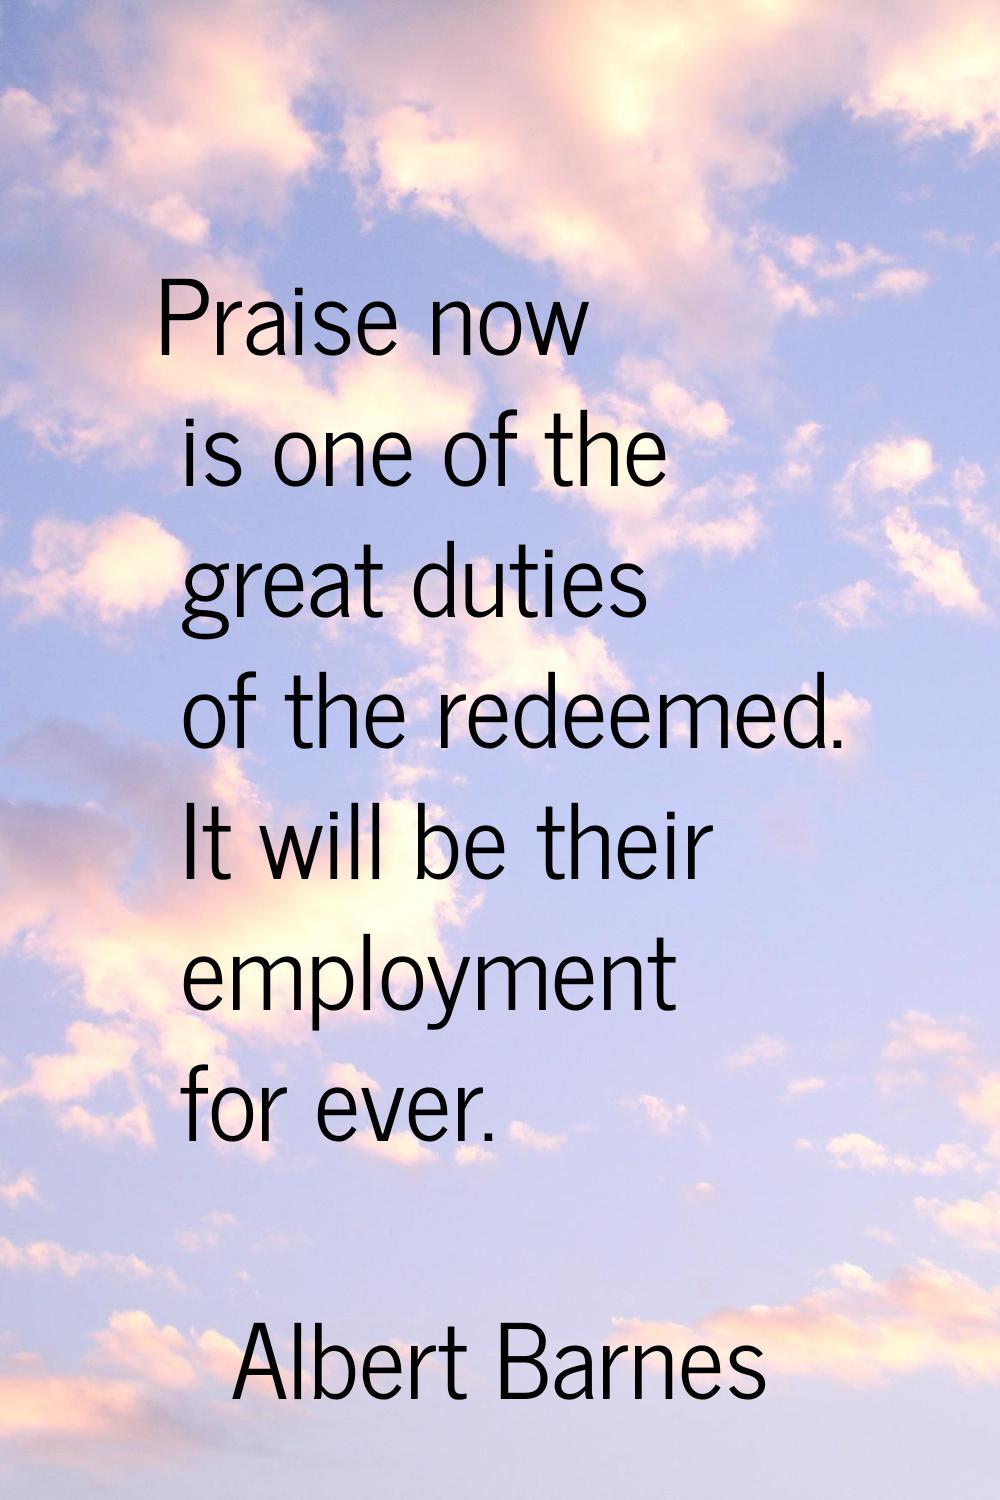 Praise now is one of the great duties of the redeemed. It will be their employment for ever.